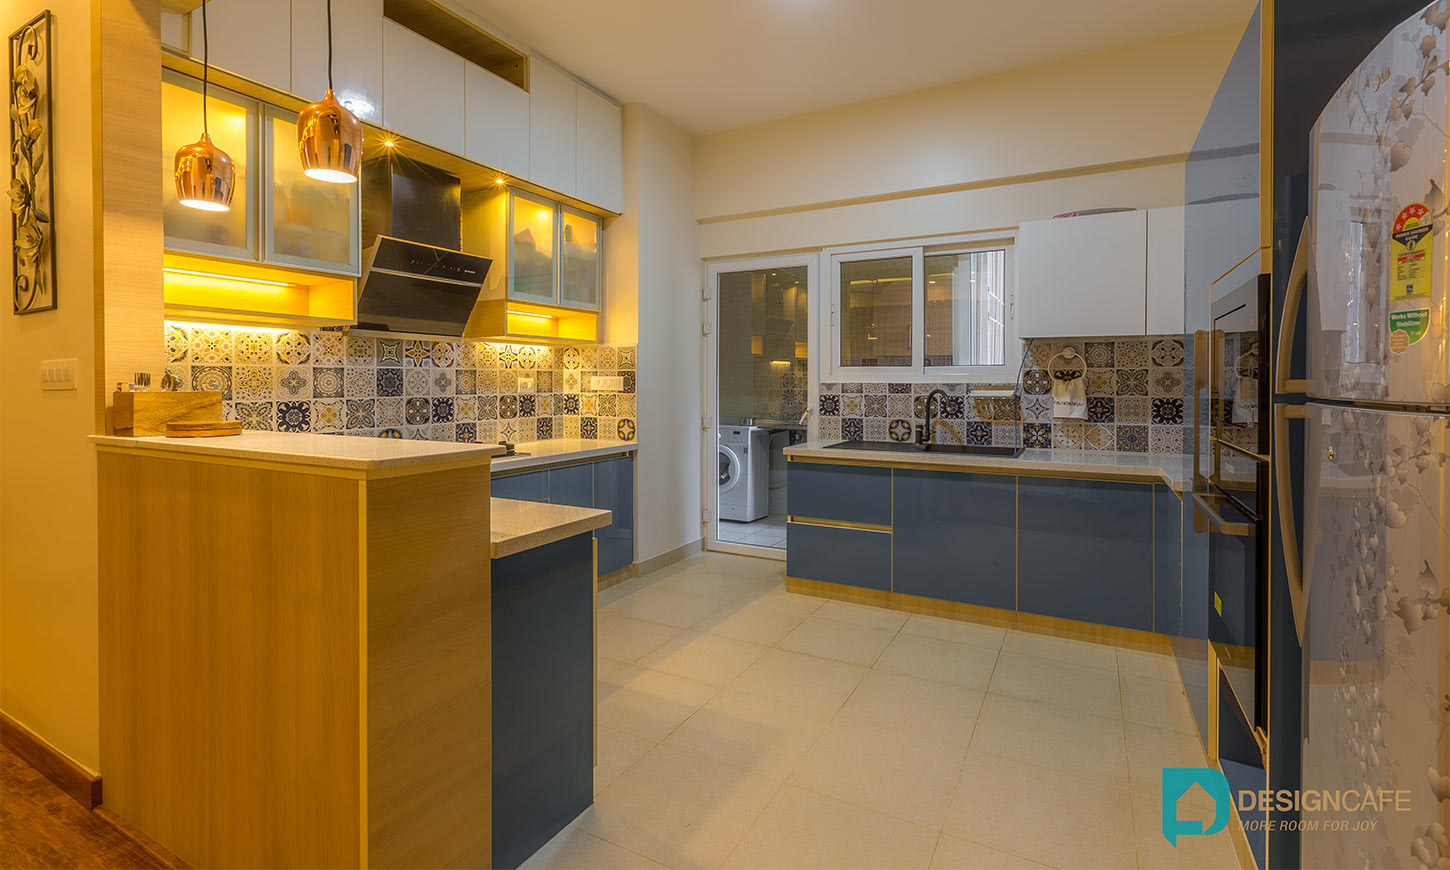 Fantastic modular kitchen designed which is one of the best home interiors bangalore